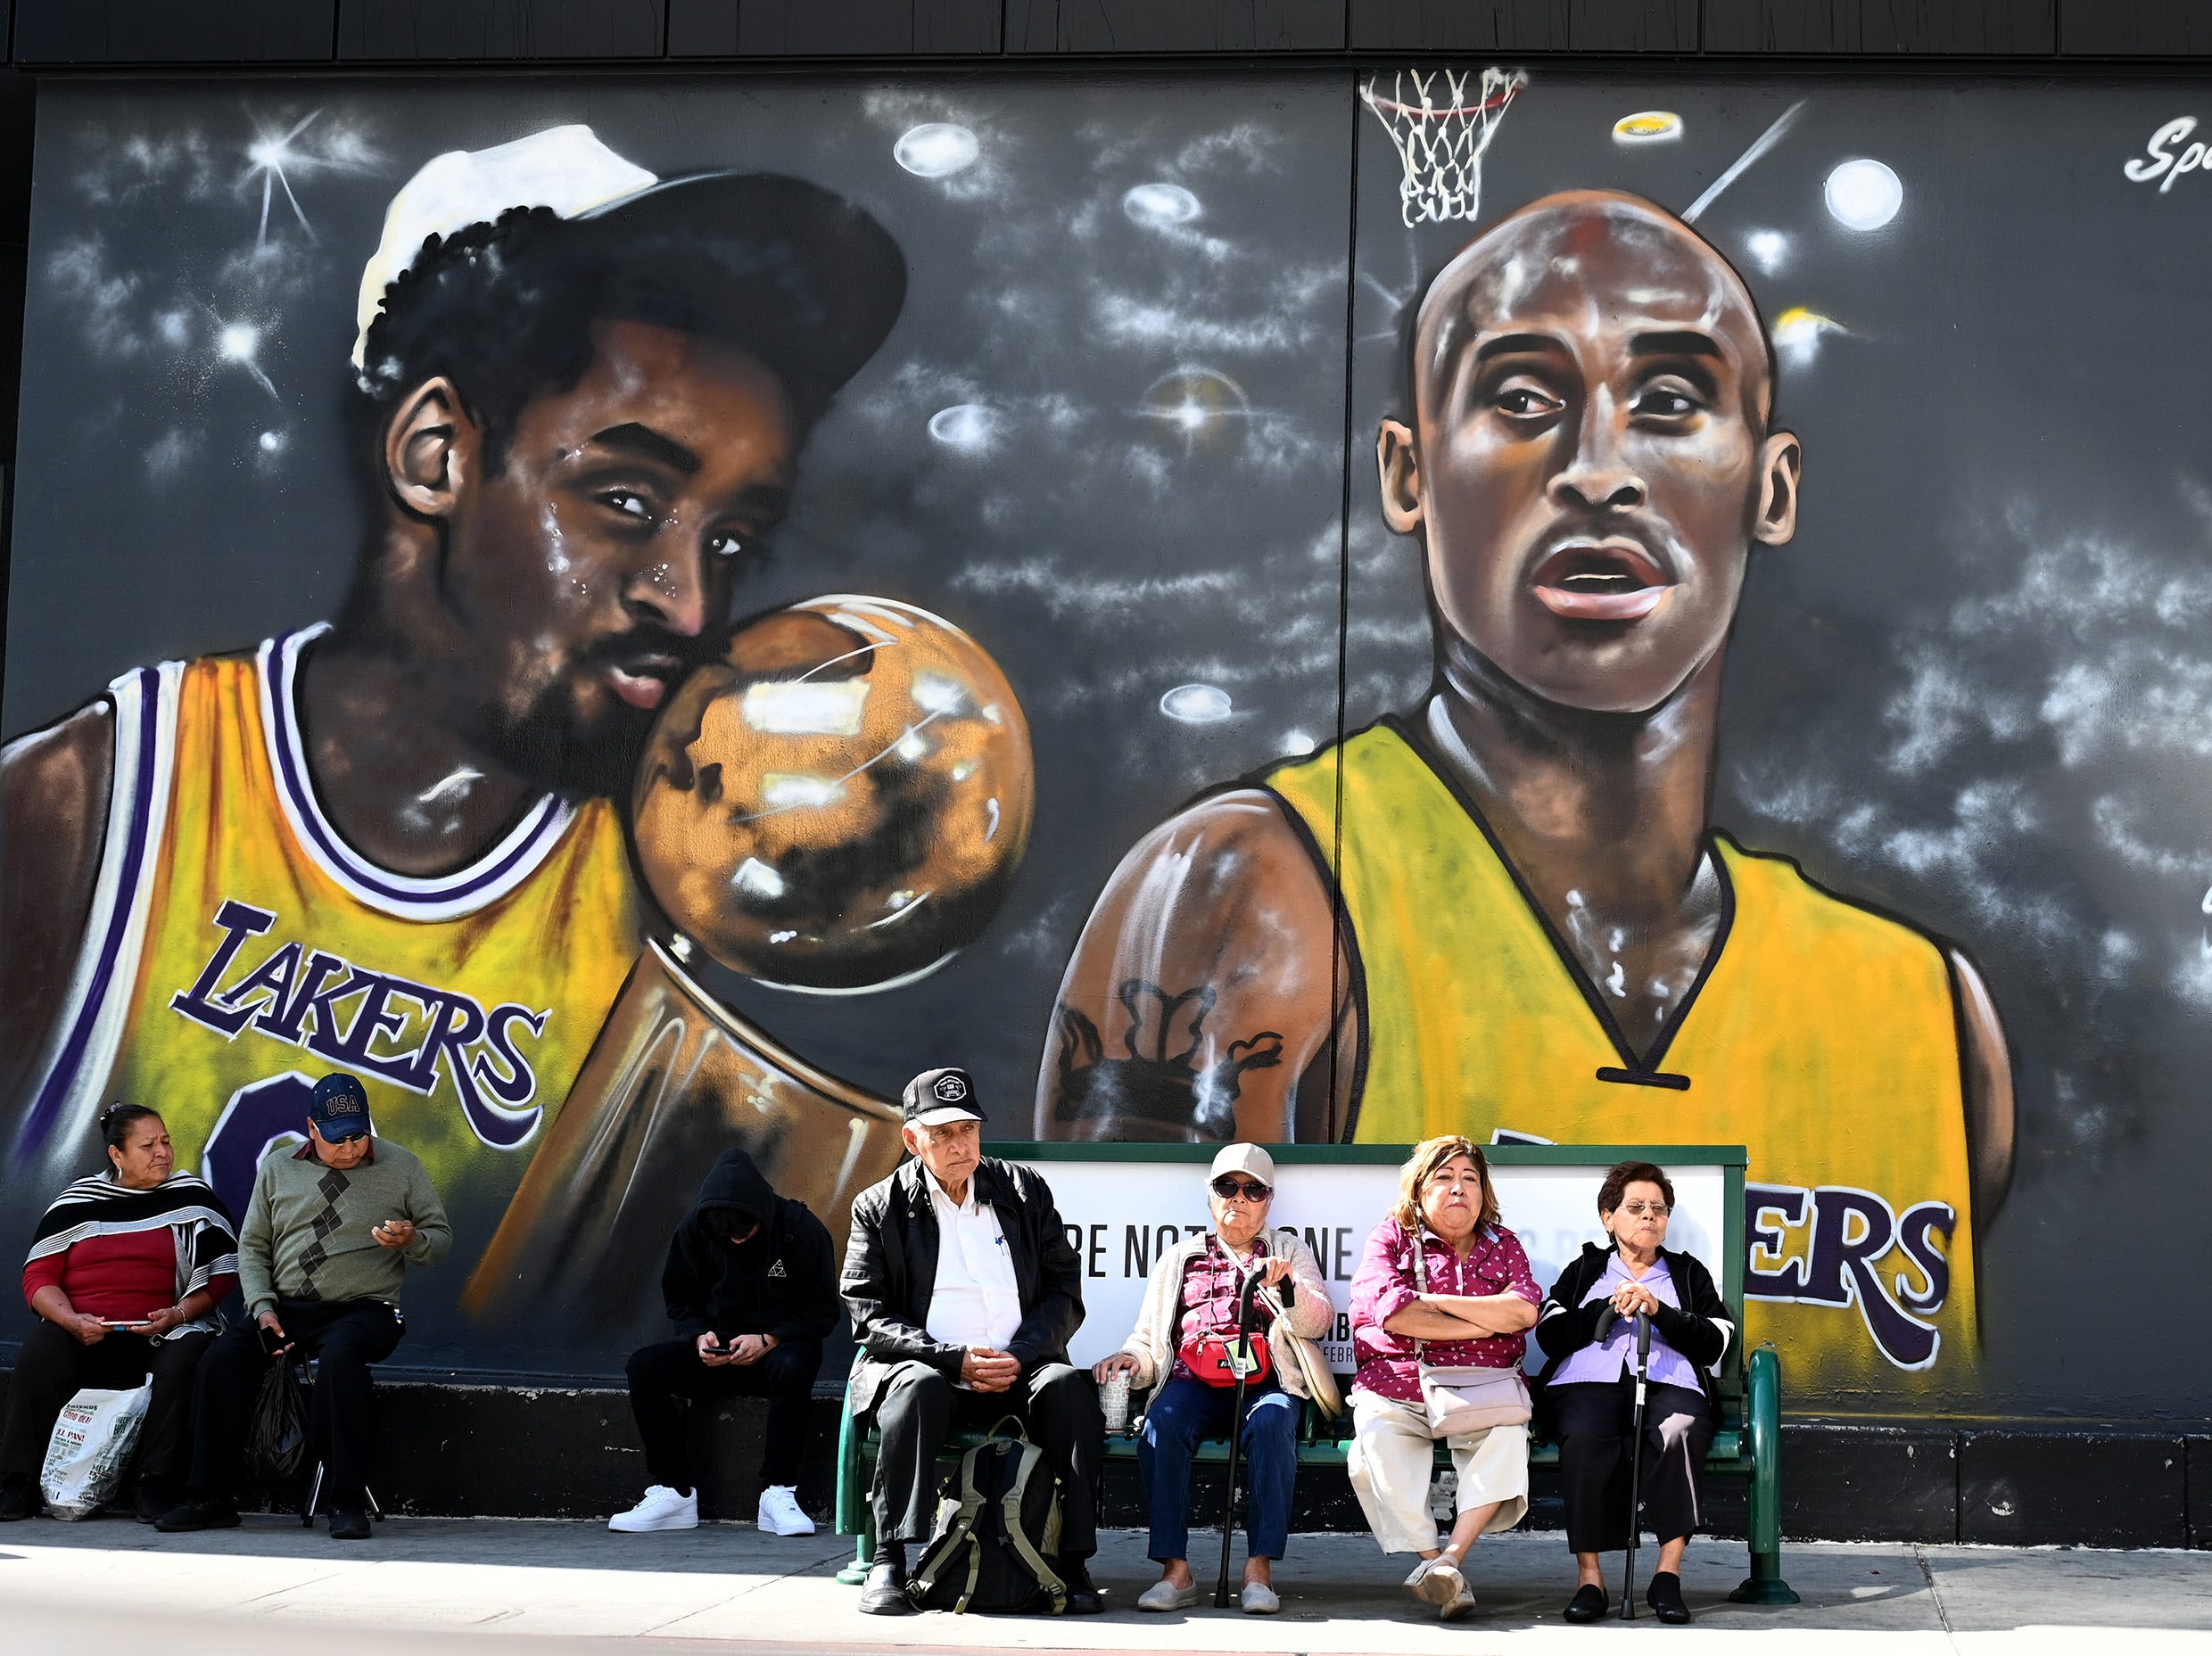 Statue of Kobe and Gianna Bryant placed at site of helicopter crash on anniversary of their deaths thumbnail